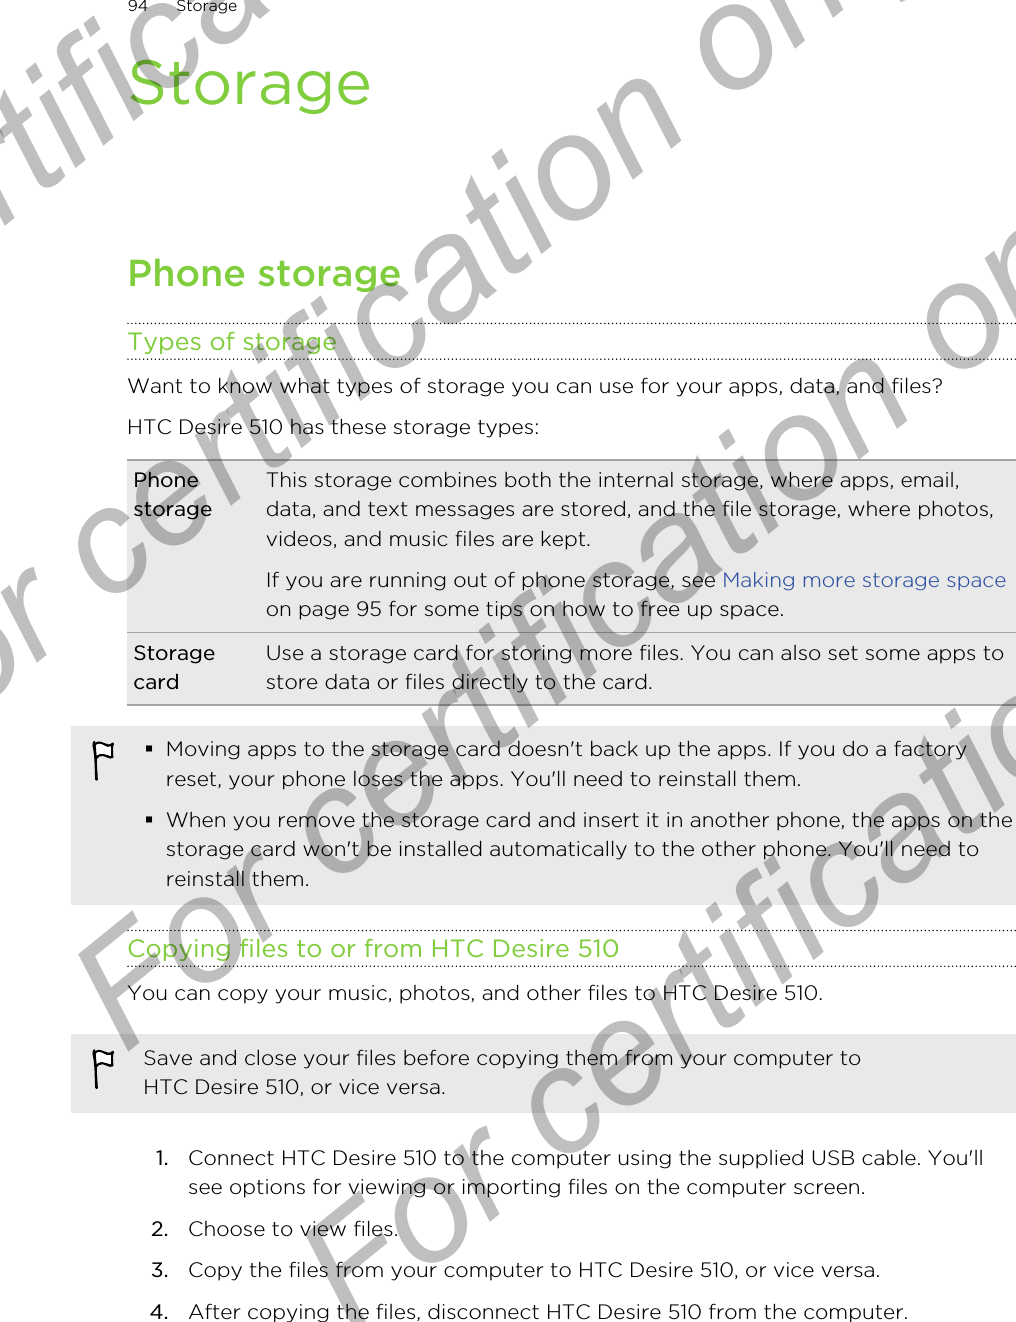 StoragePhone storageTypes of storageWant to know what types of storage you can use for your apps, data, and files?HTC Desire 510 has these storage types:PhonestorageThis storage combines both the internal storage, where apps, email,data, and text messages are stored, and the file storage, where photos,videos, and music files are kept.If you are running out of phone storage, see Making more storage spaceon page 95 for some tips on how to free up space.StoragecardUse a storage card for storing more files. You can also set some apps tostore data or files directly to the card.§Moving apps to the storage card doesn&apos;t back up the apps. If you do a factoryreset, your phone loses the apps. You&apos;ll need to reinstall them.§When you remove the storage card and insert it in another phone, the apps on thestorage card won&apos;t be installed automatically to the other phone. You&apos;ll need toreinstall them.Copying files to or from HTC Desire 510You can copy your music, photos, and other files to HTC Desire 510.Save and close your files before copying them from your computer toHTC Desire 510, or vice versa.1. Connect HTC Desire 510 to the computer using the supplied USB cable. You&apos;llsee options for viewing or importing files on the computer screen.2. Choose to view files.3. Copy the files from your computer to HTC Desire 510, or vice versa.4. After copying the files, disconnect HTC Desire 510 from the computer.94 StorageFor certification only  For certification only  For certification only  For certification only 